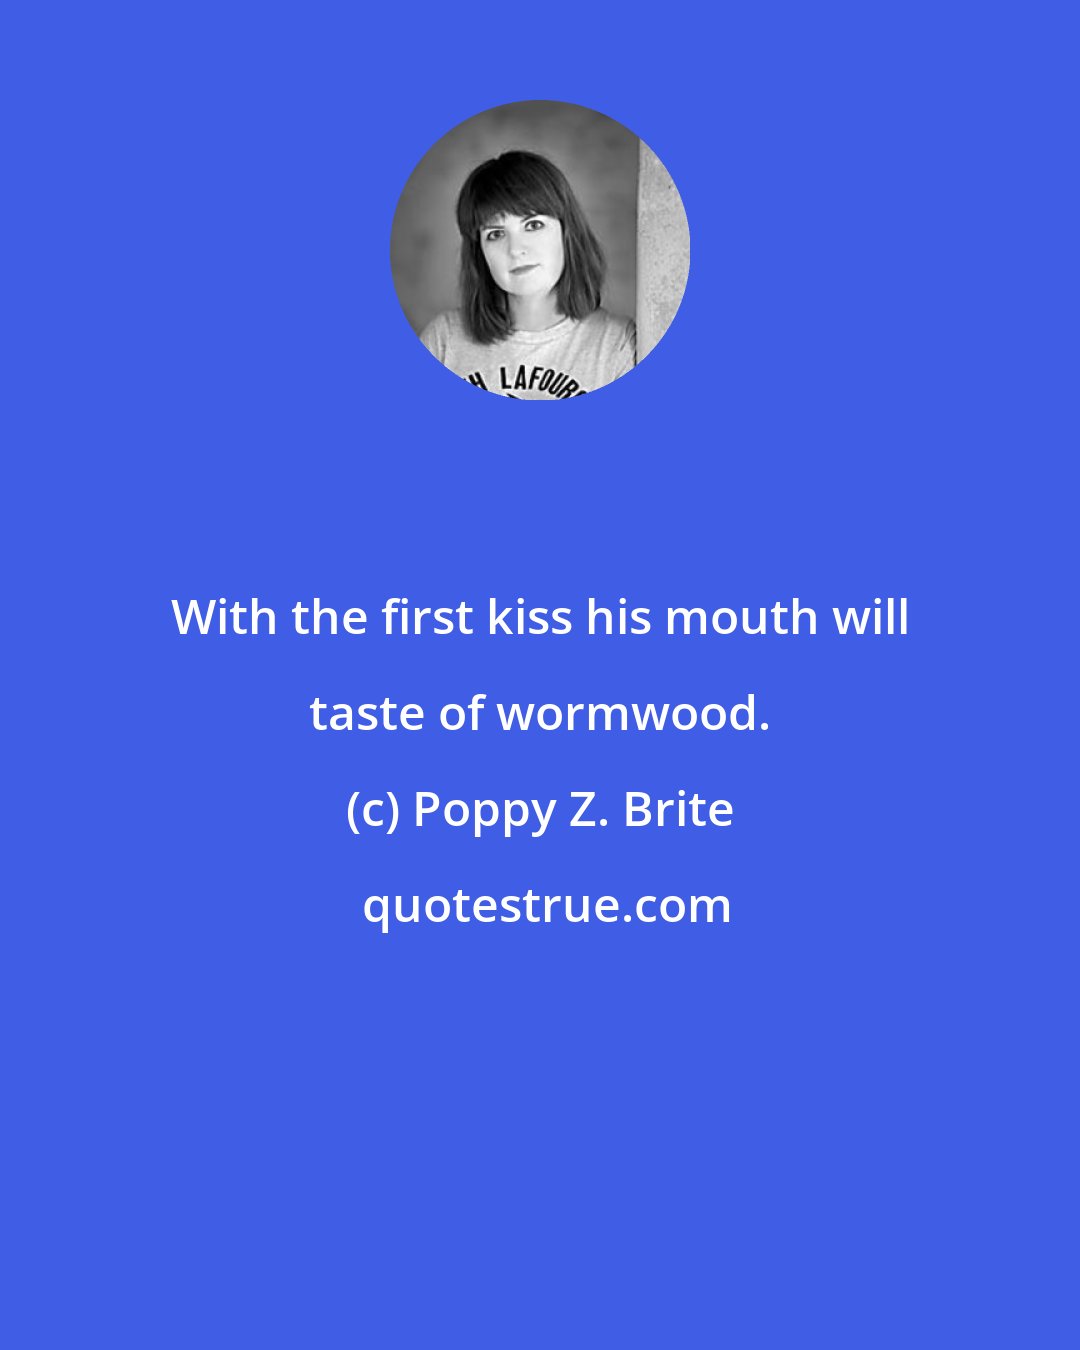 Poppy Z. Brite: With the first kiss his mouth will taste of wormwood.